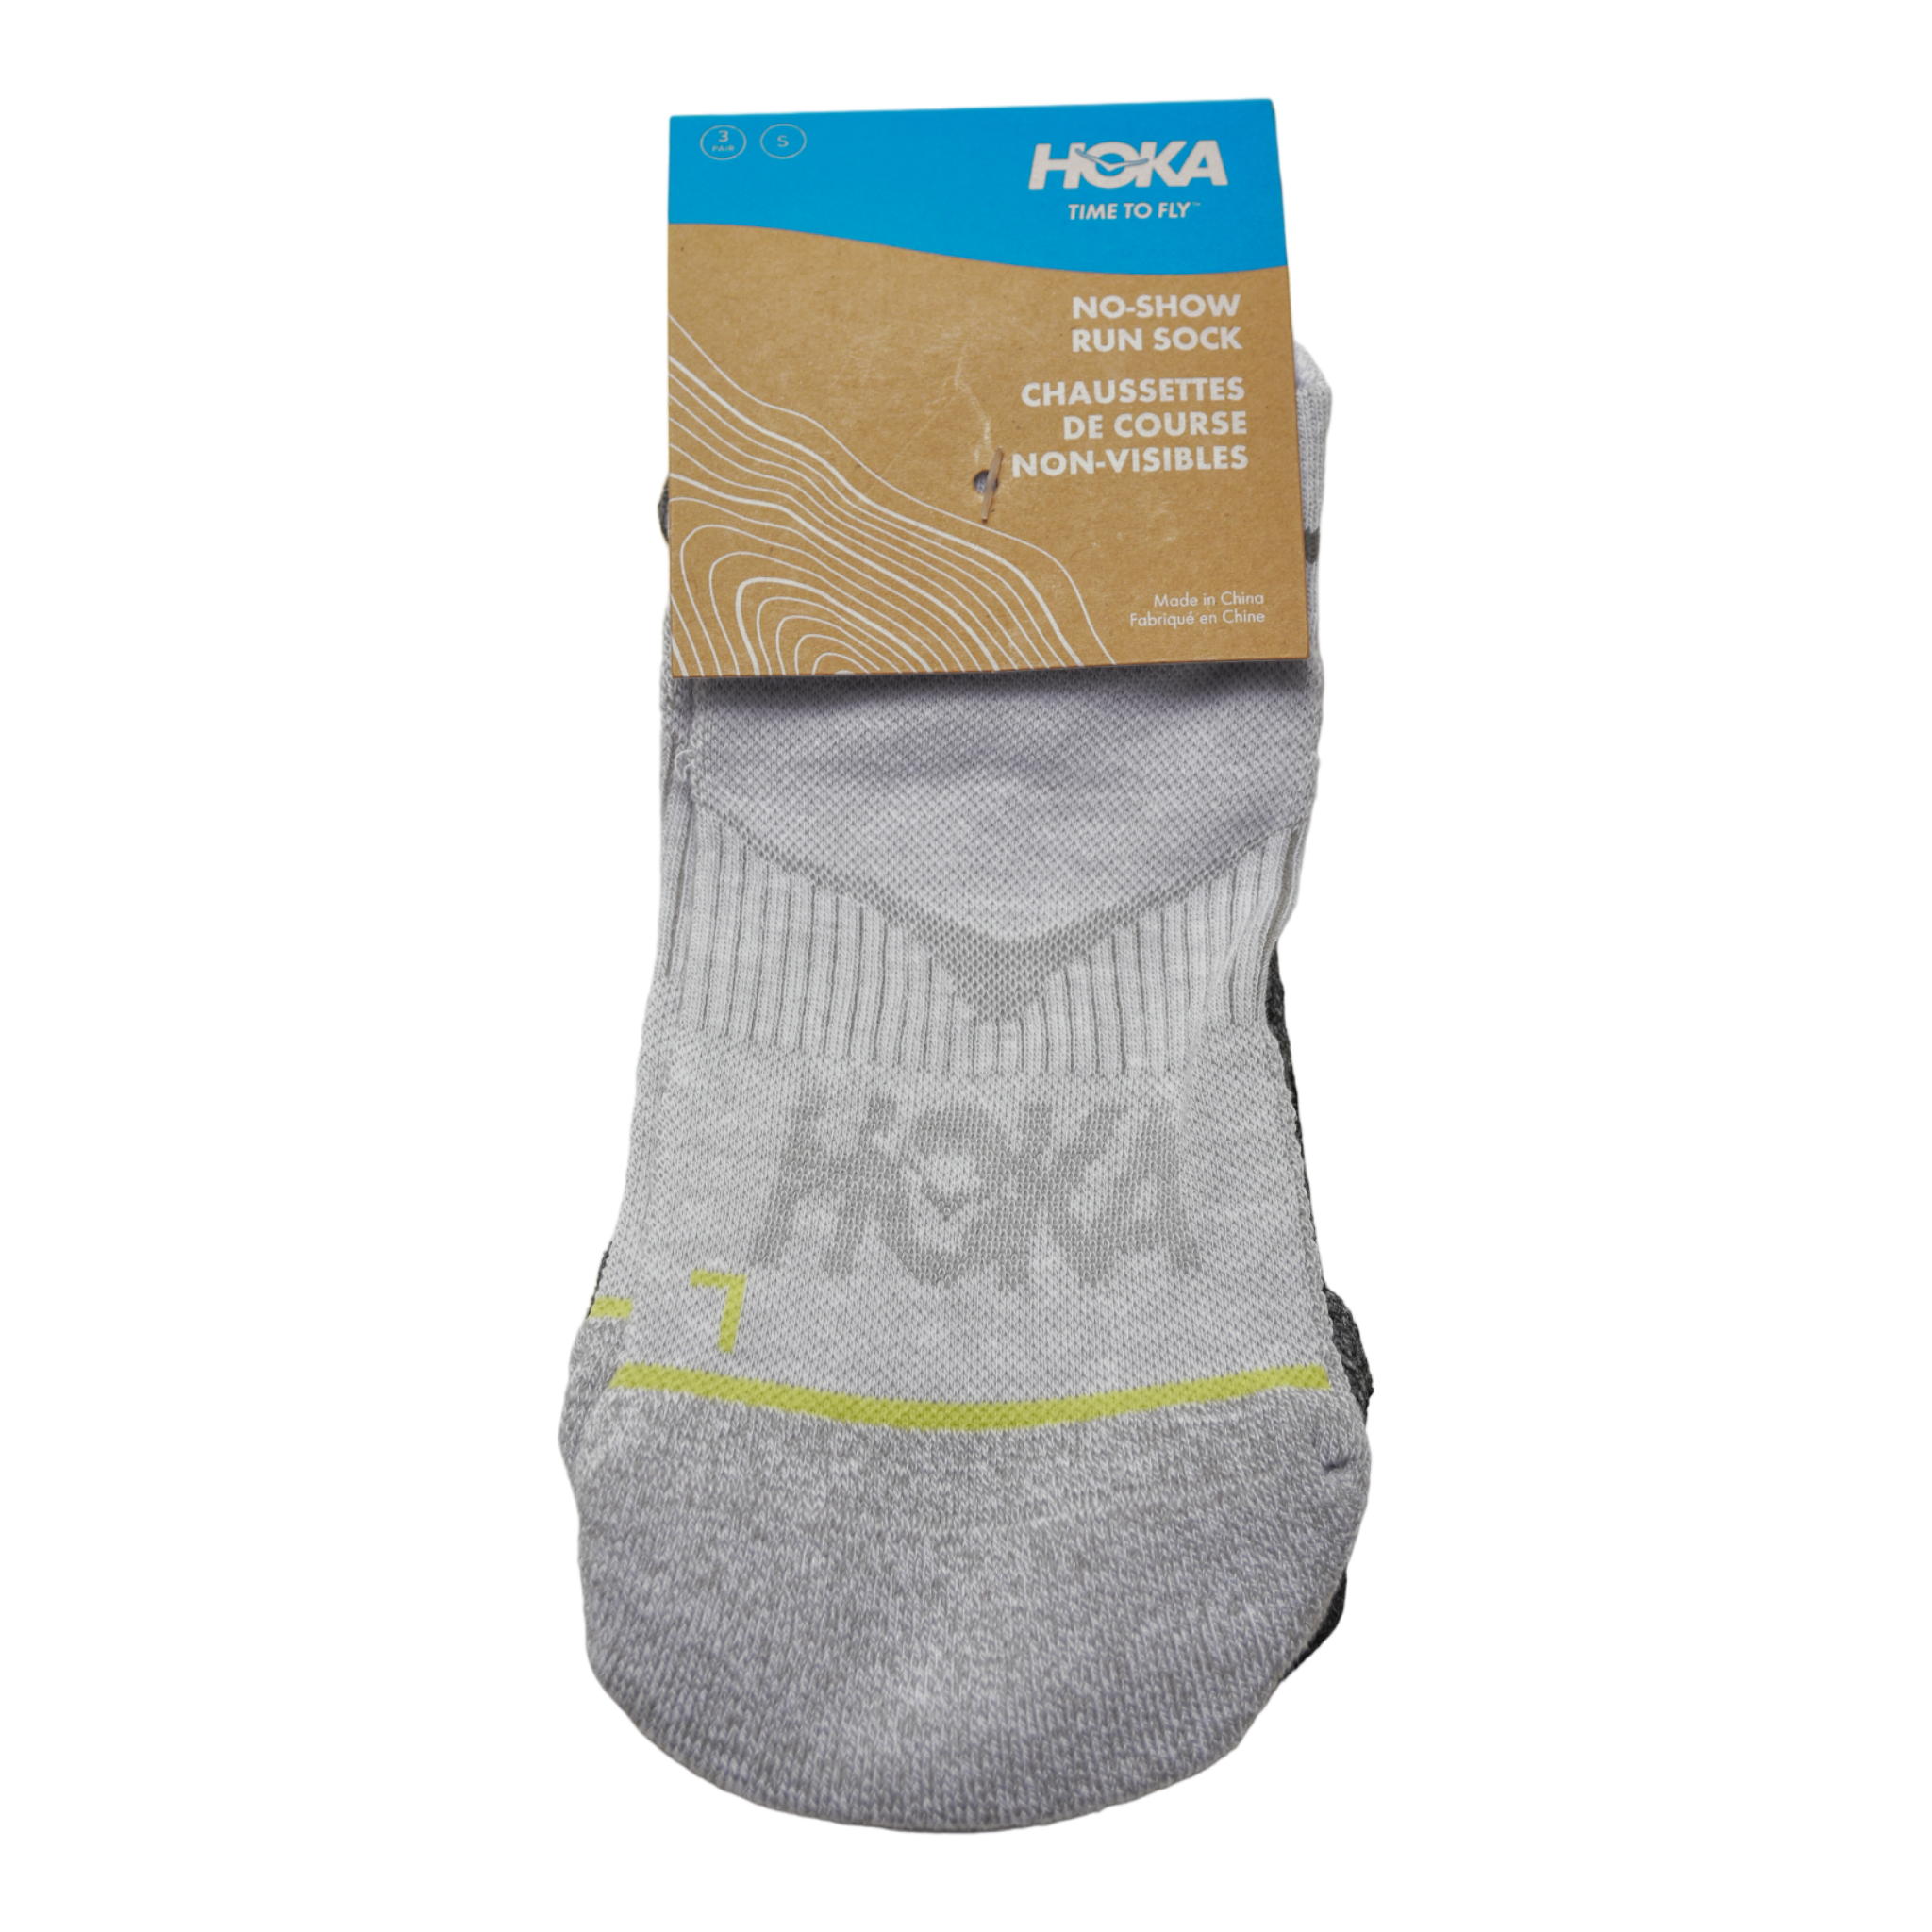 3 PACK - Chaussettes - silver chine/white/black